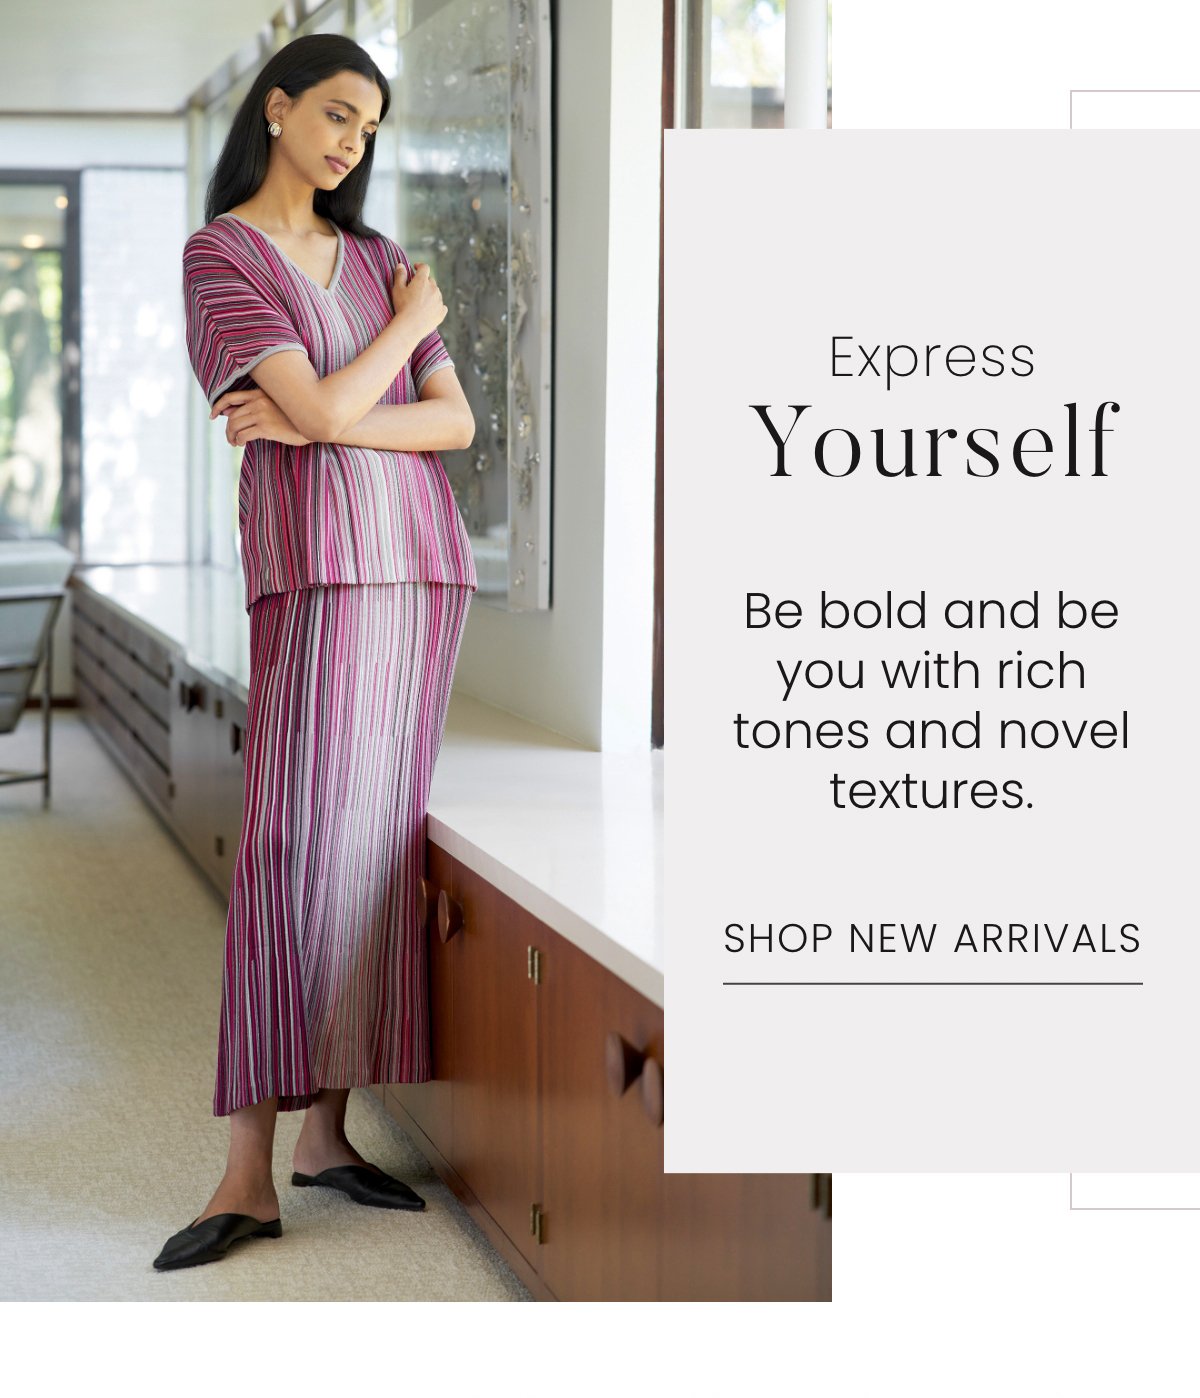 Express Yourself - Be bold and be you with rich tones and novel textures. Shop New Arrivals >>